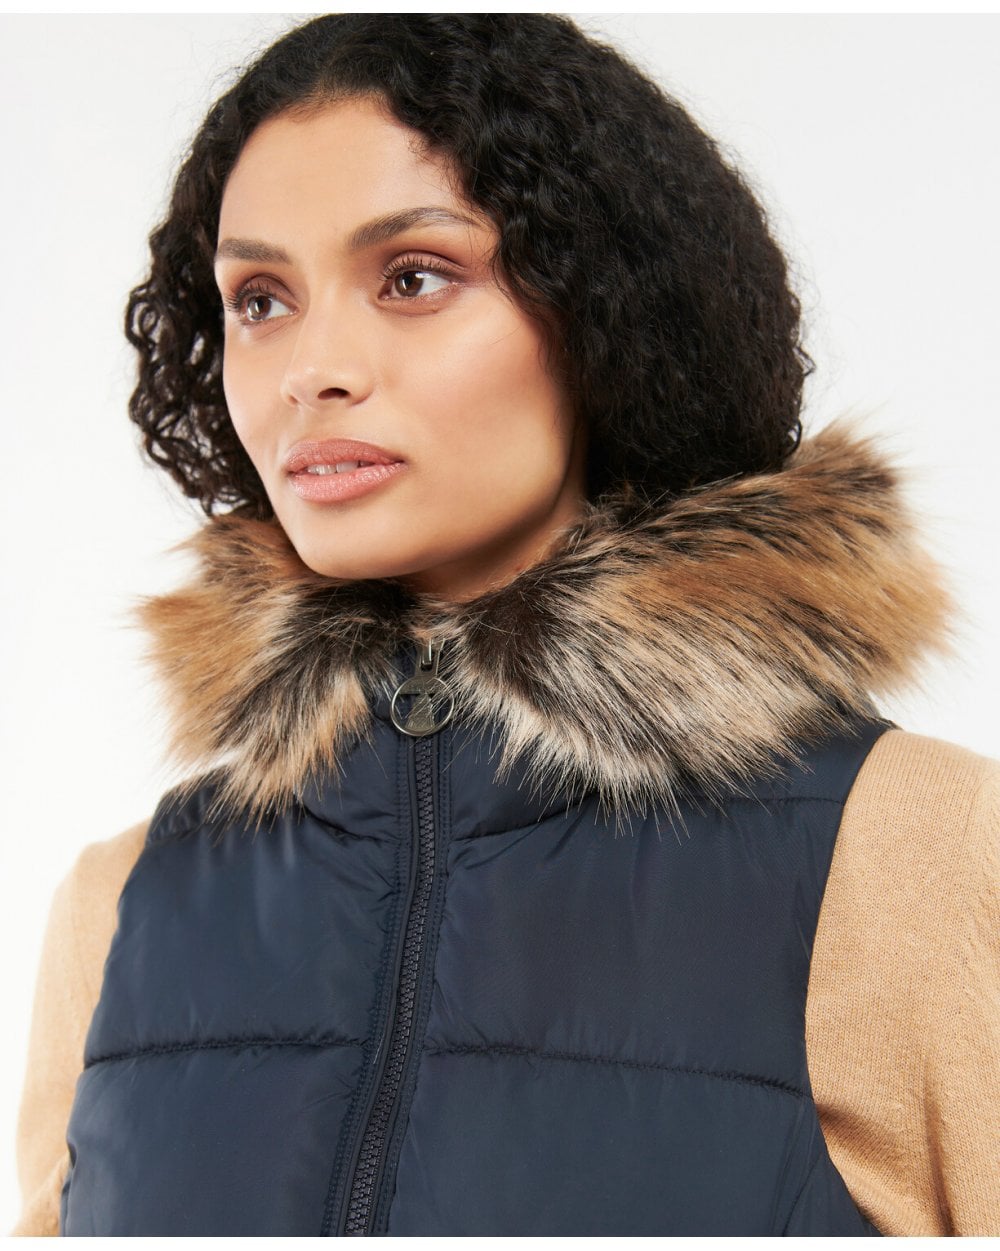 Midhurst Quilted Gilet